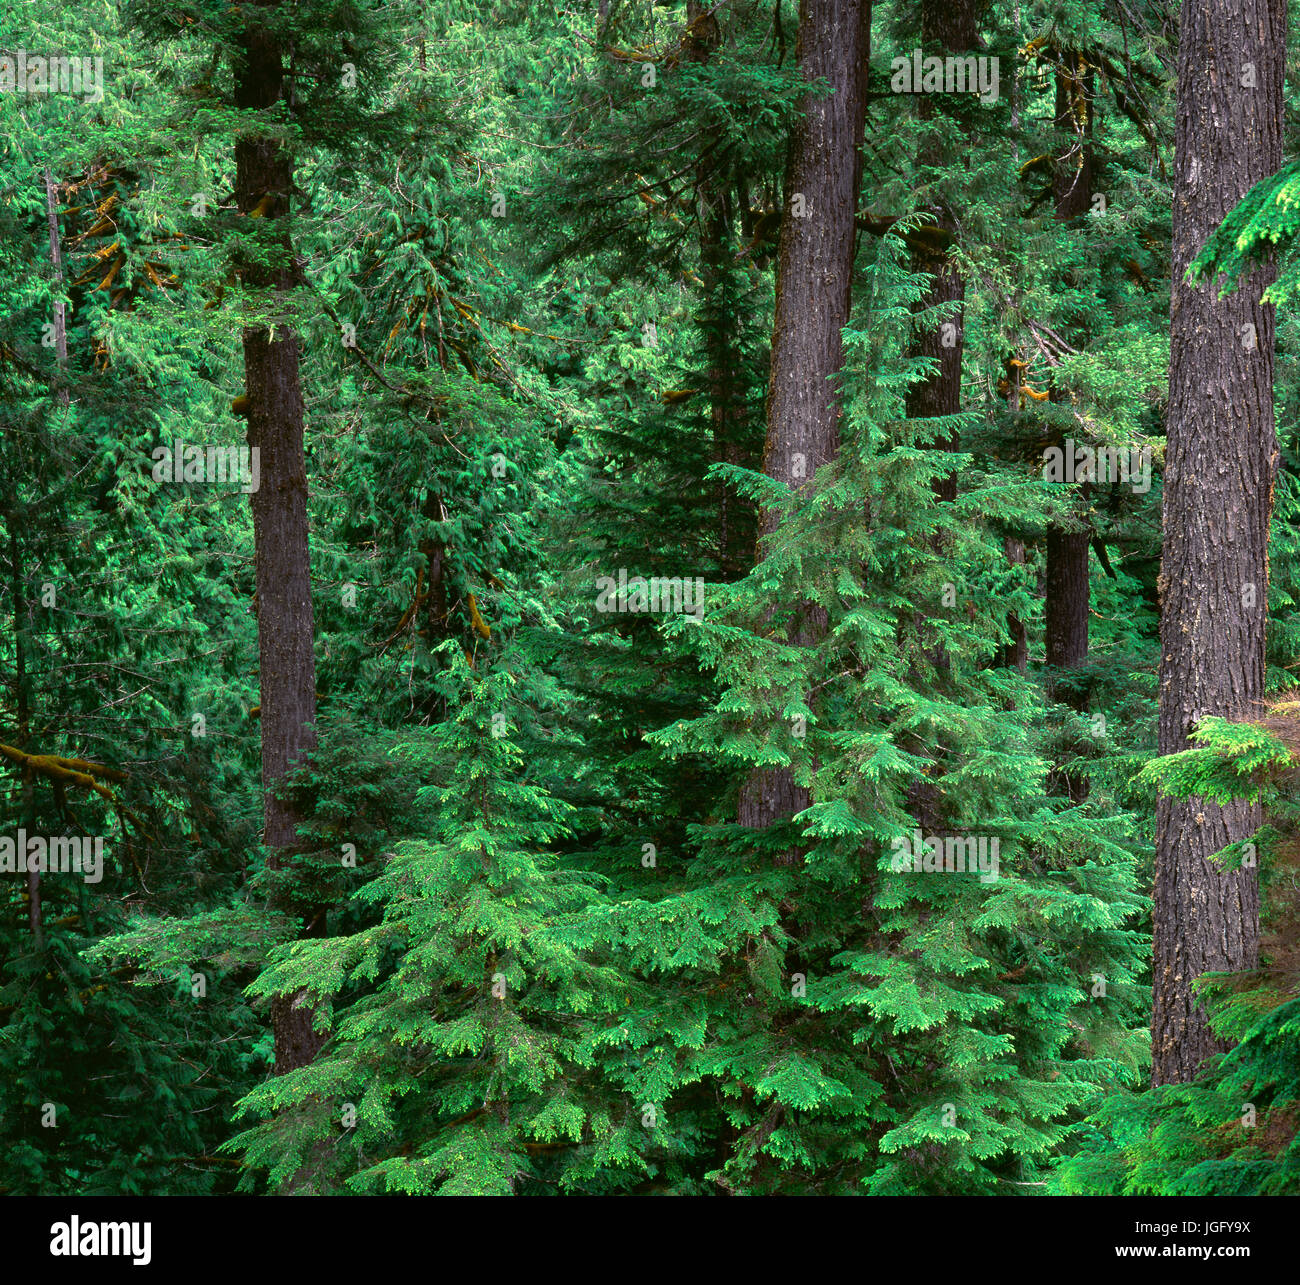 USA, Oregon, Willamette National Forest, Middle Santiam Wilderness, Old-growth forest with large Douglas fir and western hemlock trees. Stock Photo